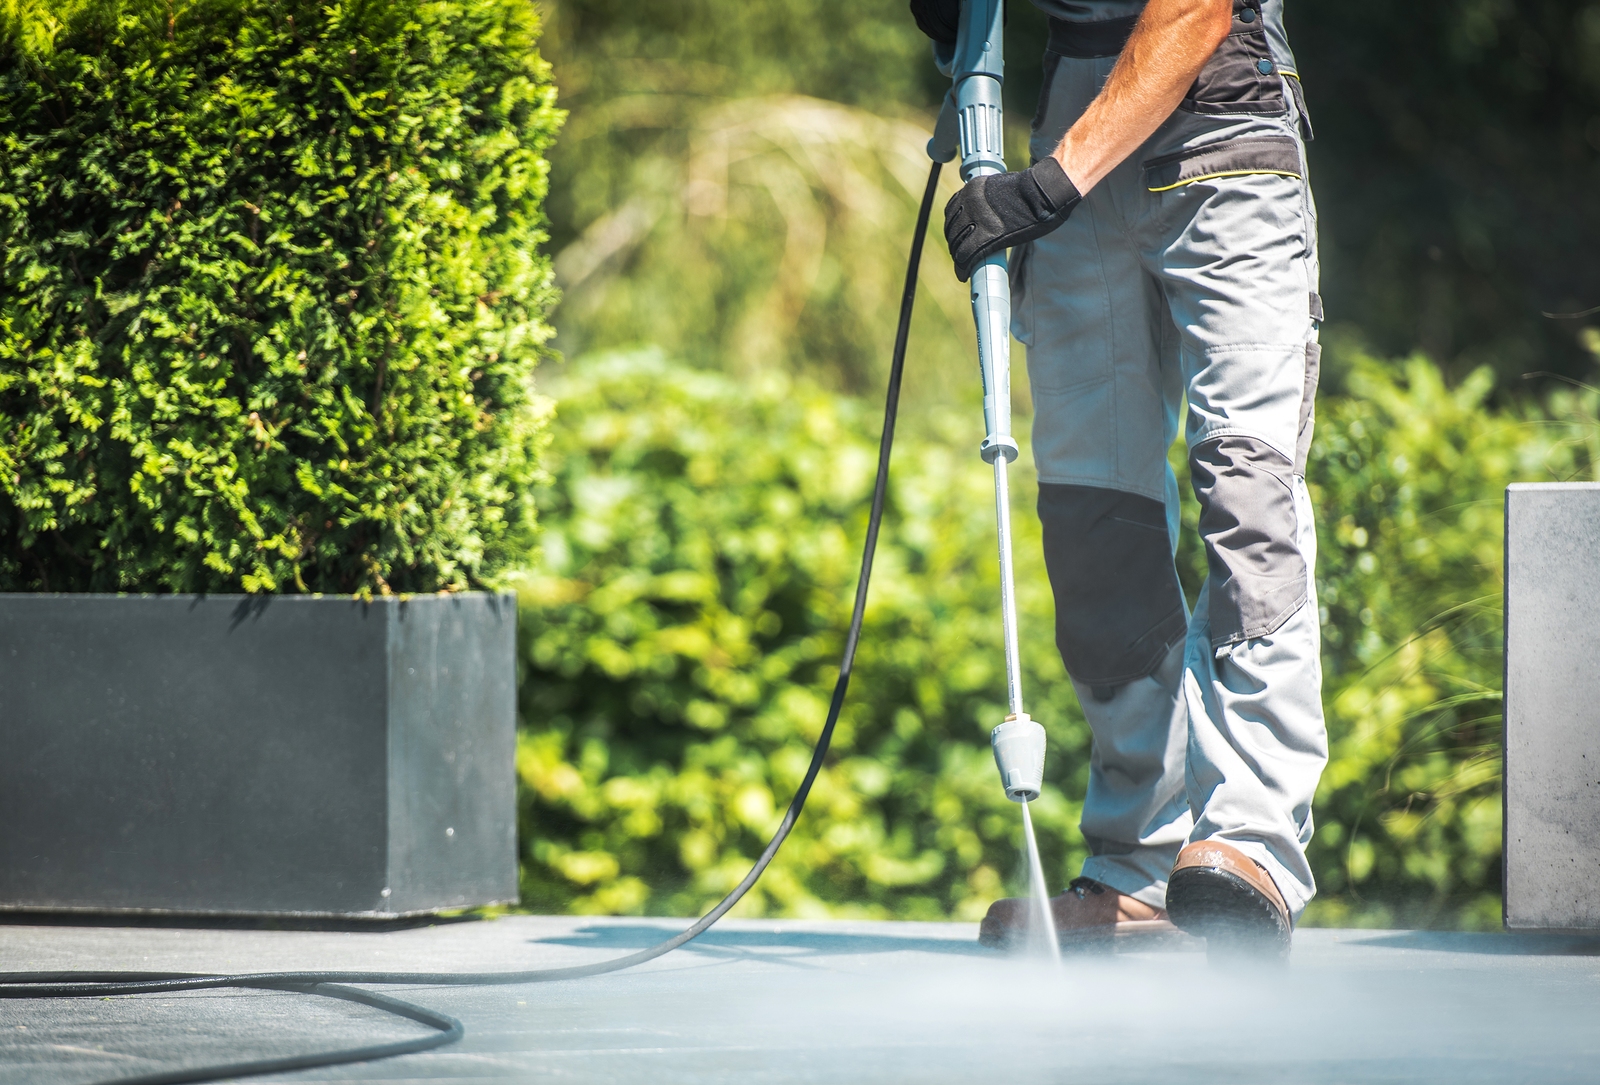 Some Of The Best Pressure Washers On The Market